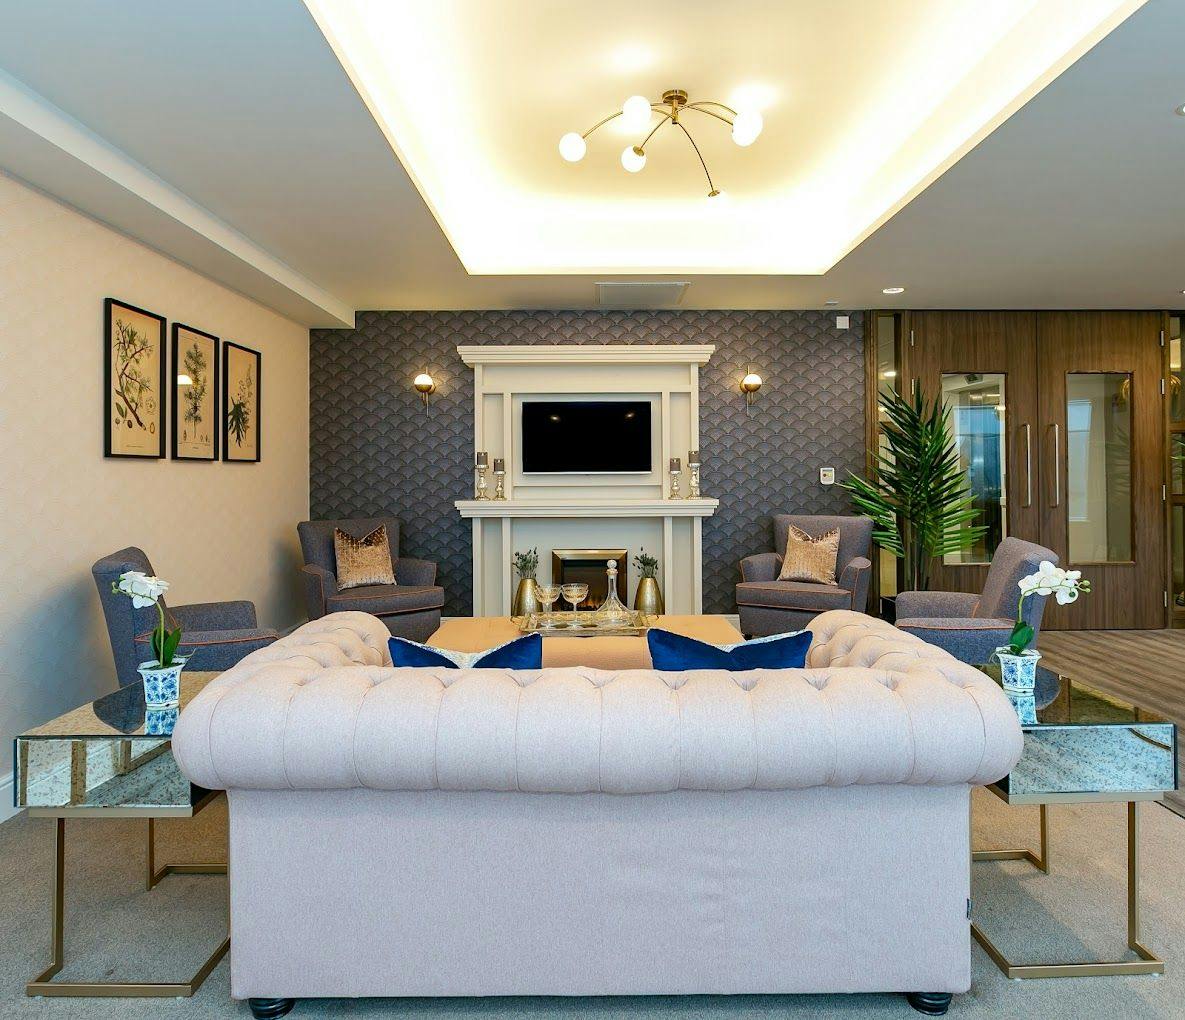 Lounge of Harcourt Gardens care home in Harrogate, Yorkshire